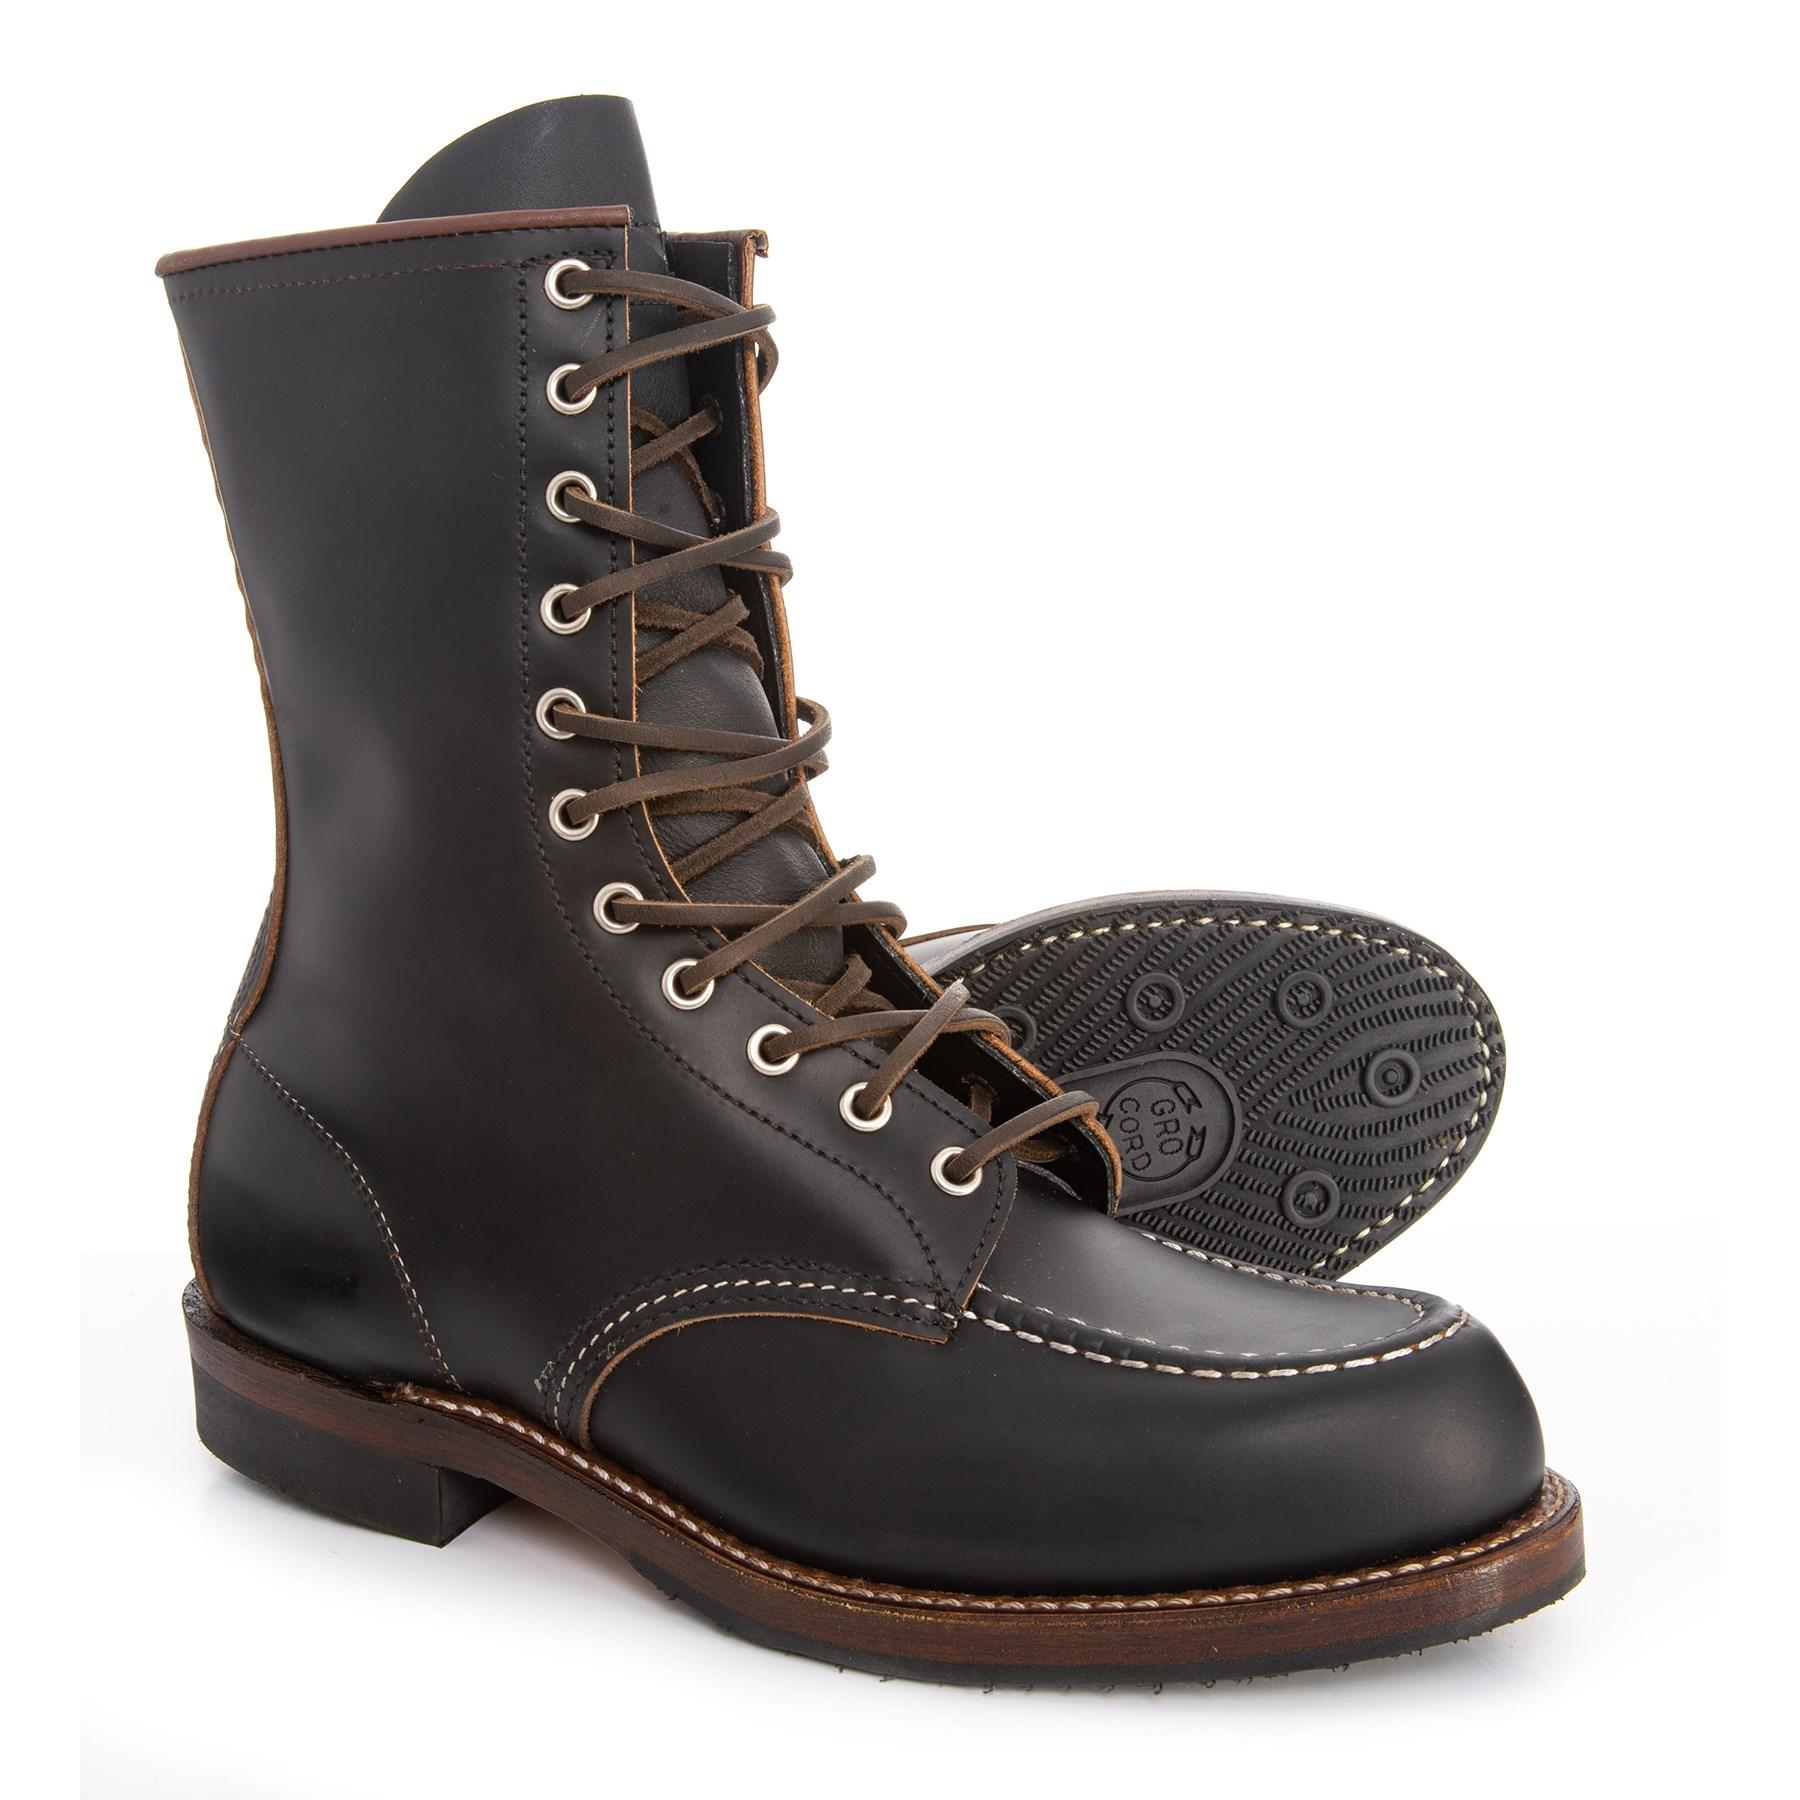 Red Wing Huntsman Leather Boots in Black for Men - Lyst